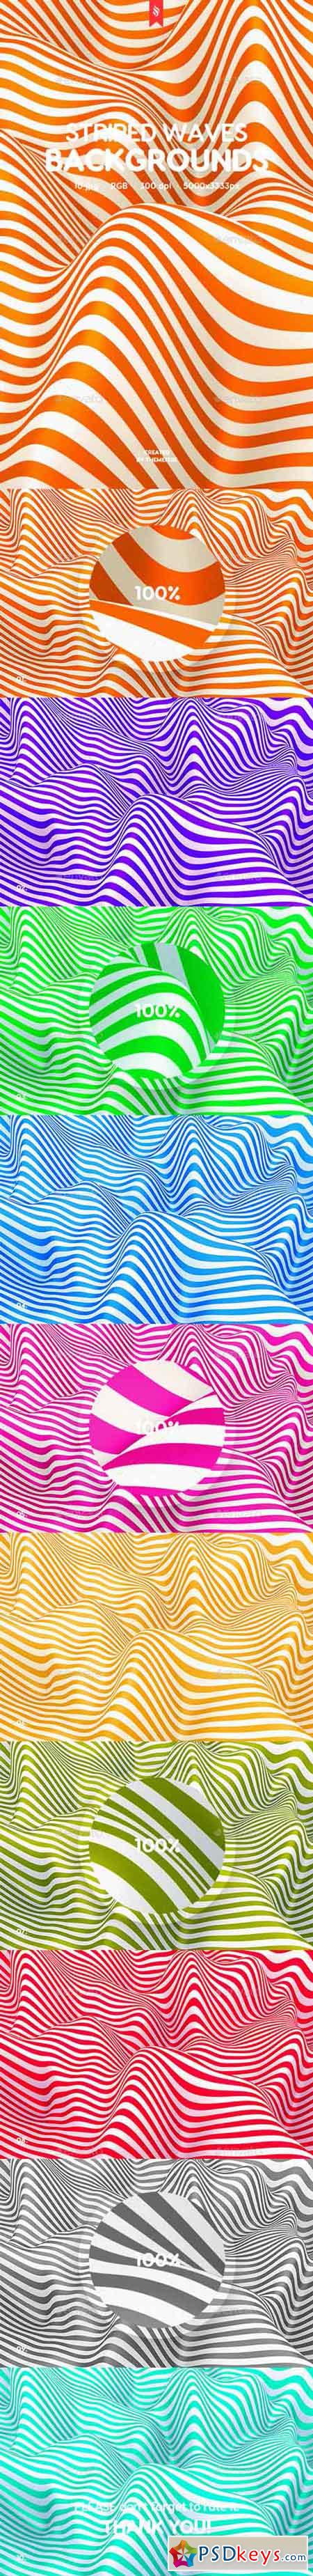 Striped Waves Backgrounds 20244368